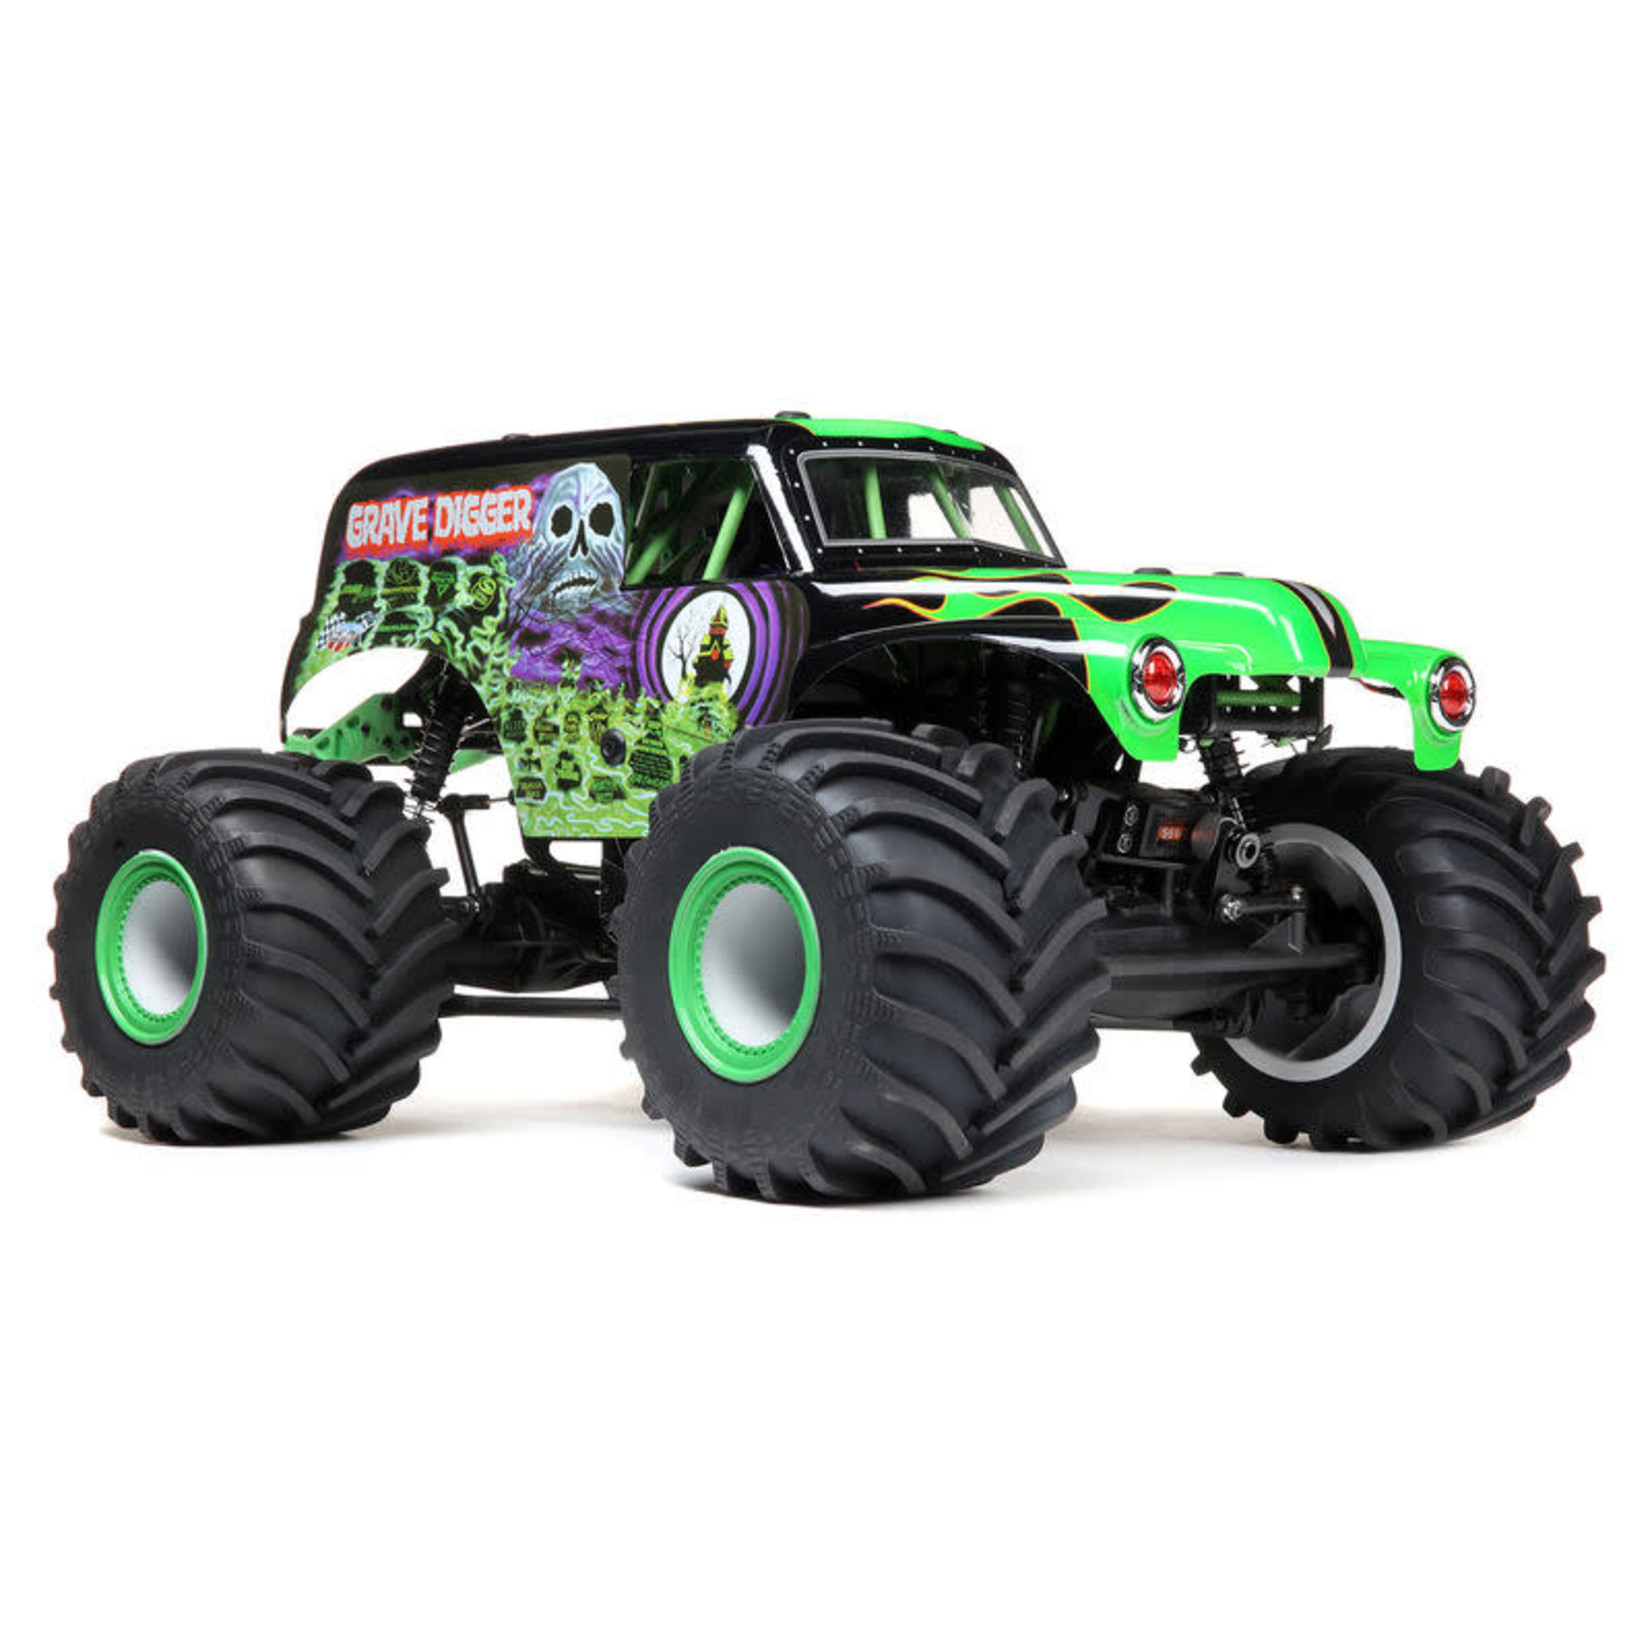 Losi Losi LMT Grave Digger RTR 1/10 4WD Solid Axle Monster Truck w/DX3 2.4GHz Radio #LOS04021T1